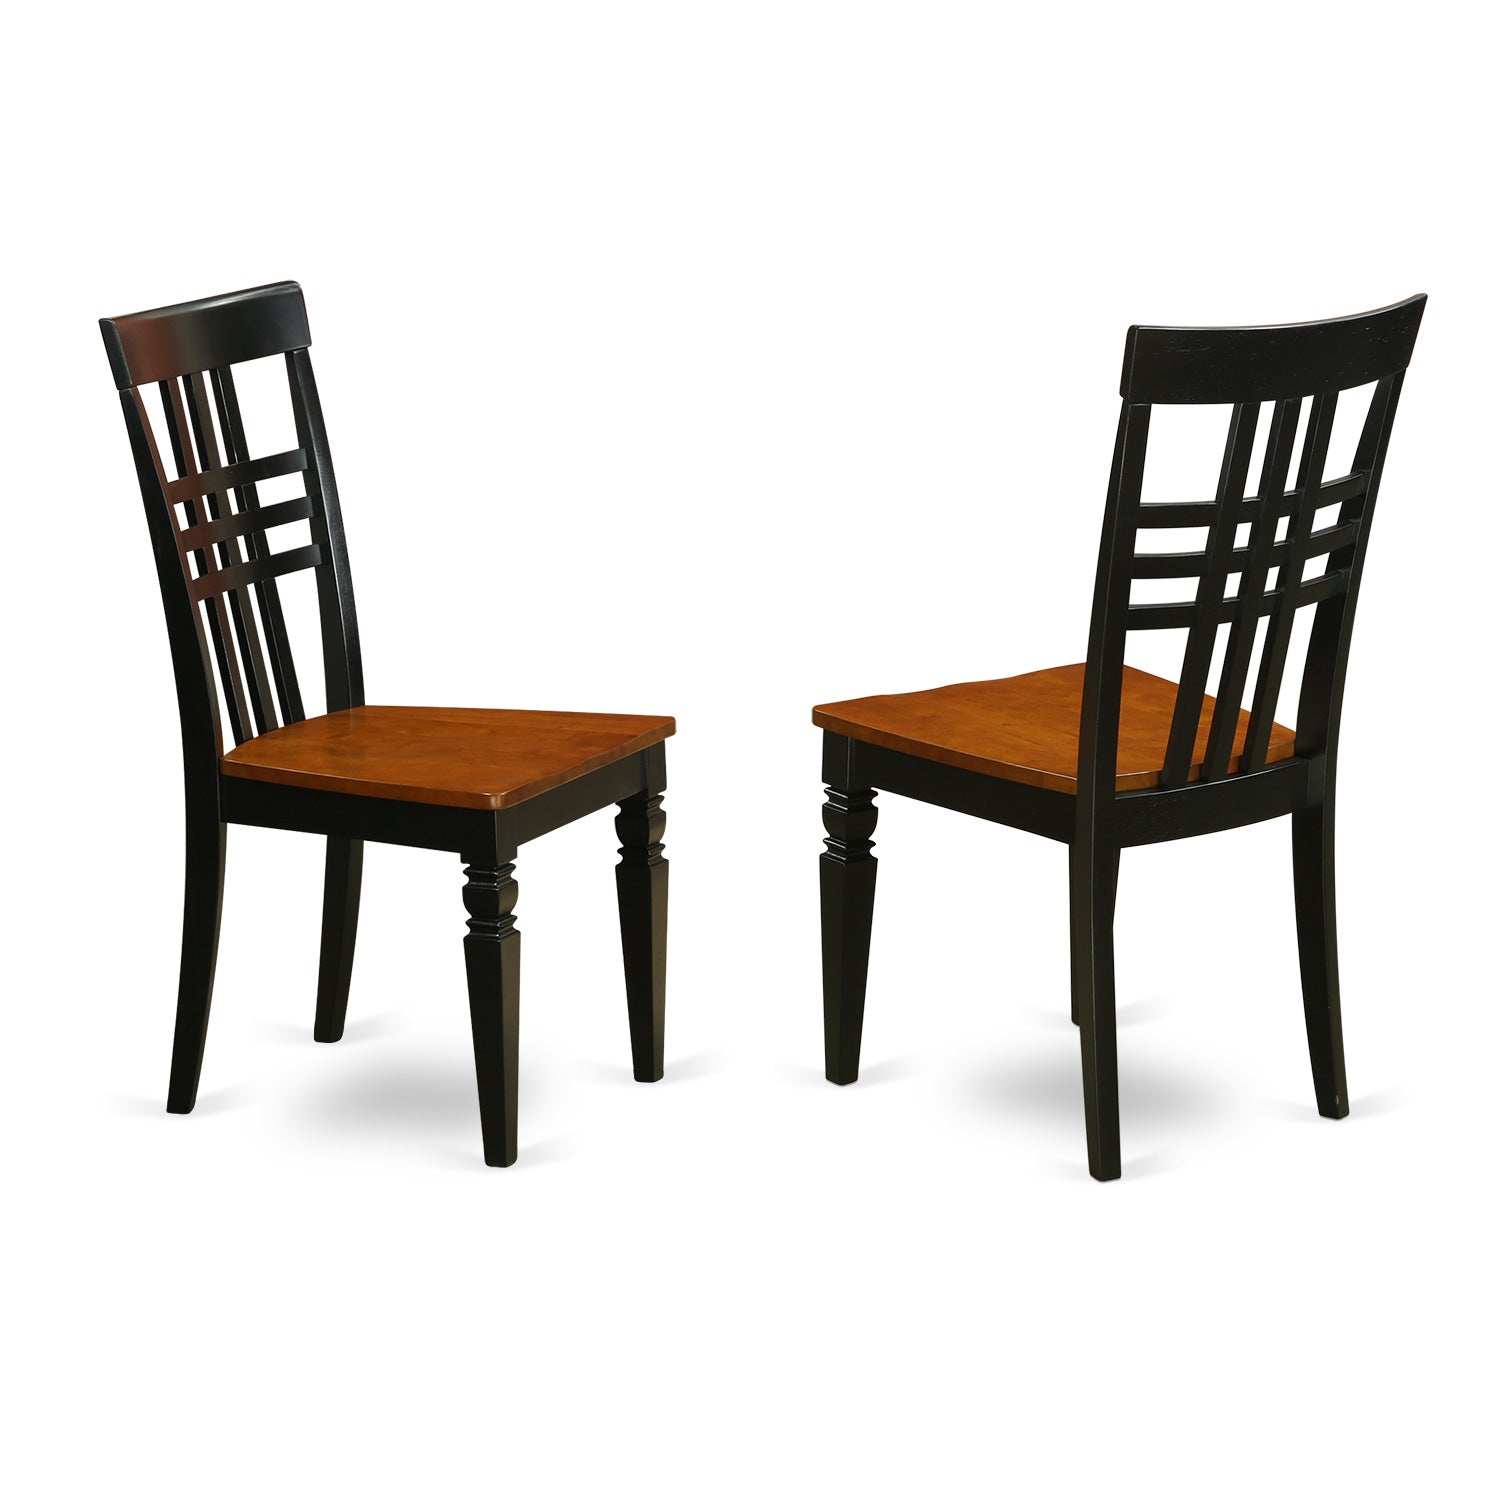 LGC-BCH-W Logan Dining Chair with Wood Seat - Black & Cherry Finish.